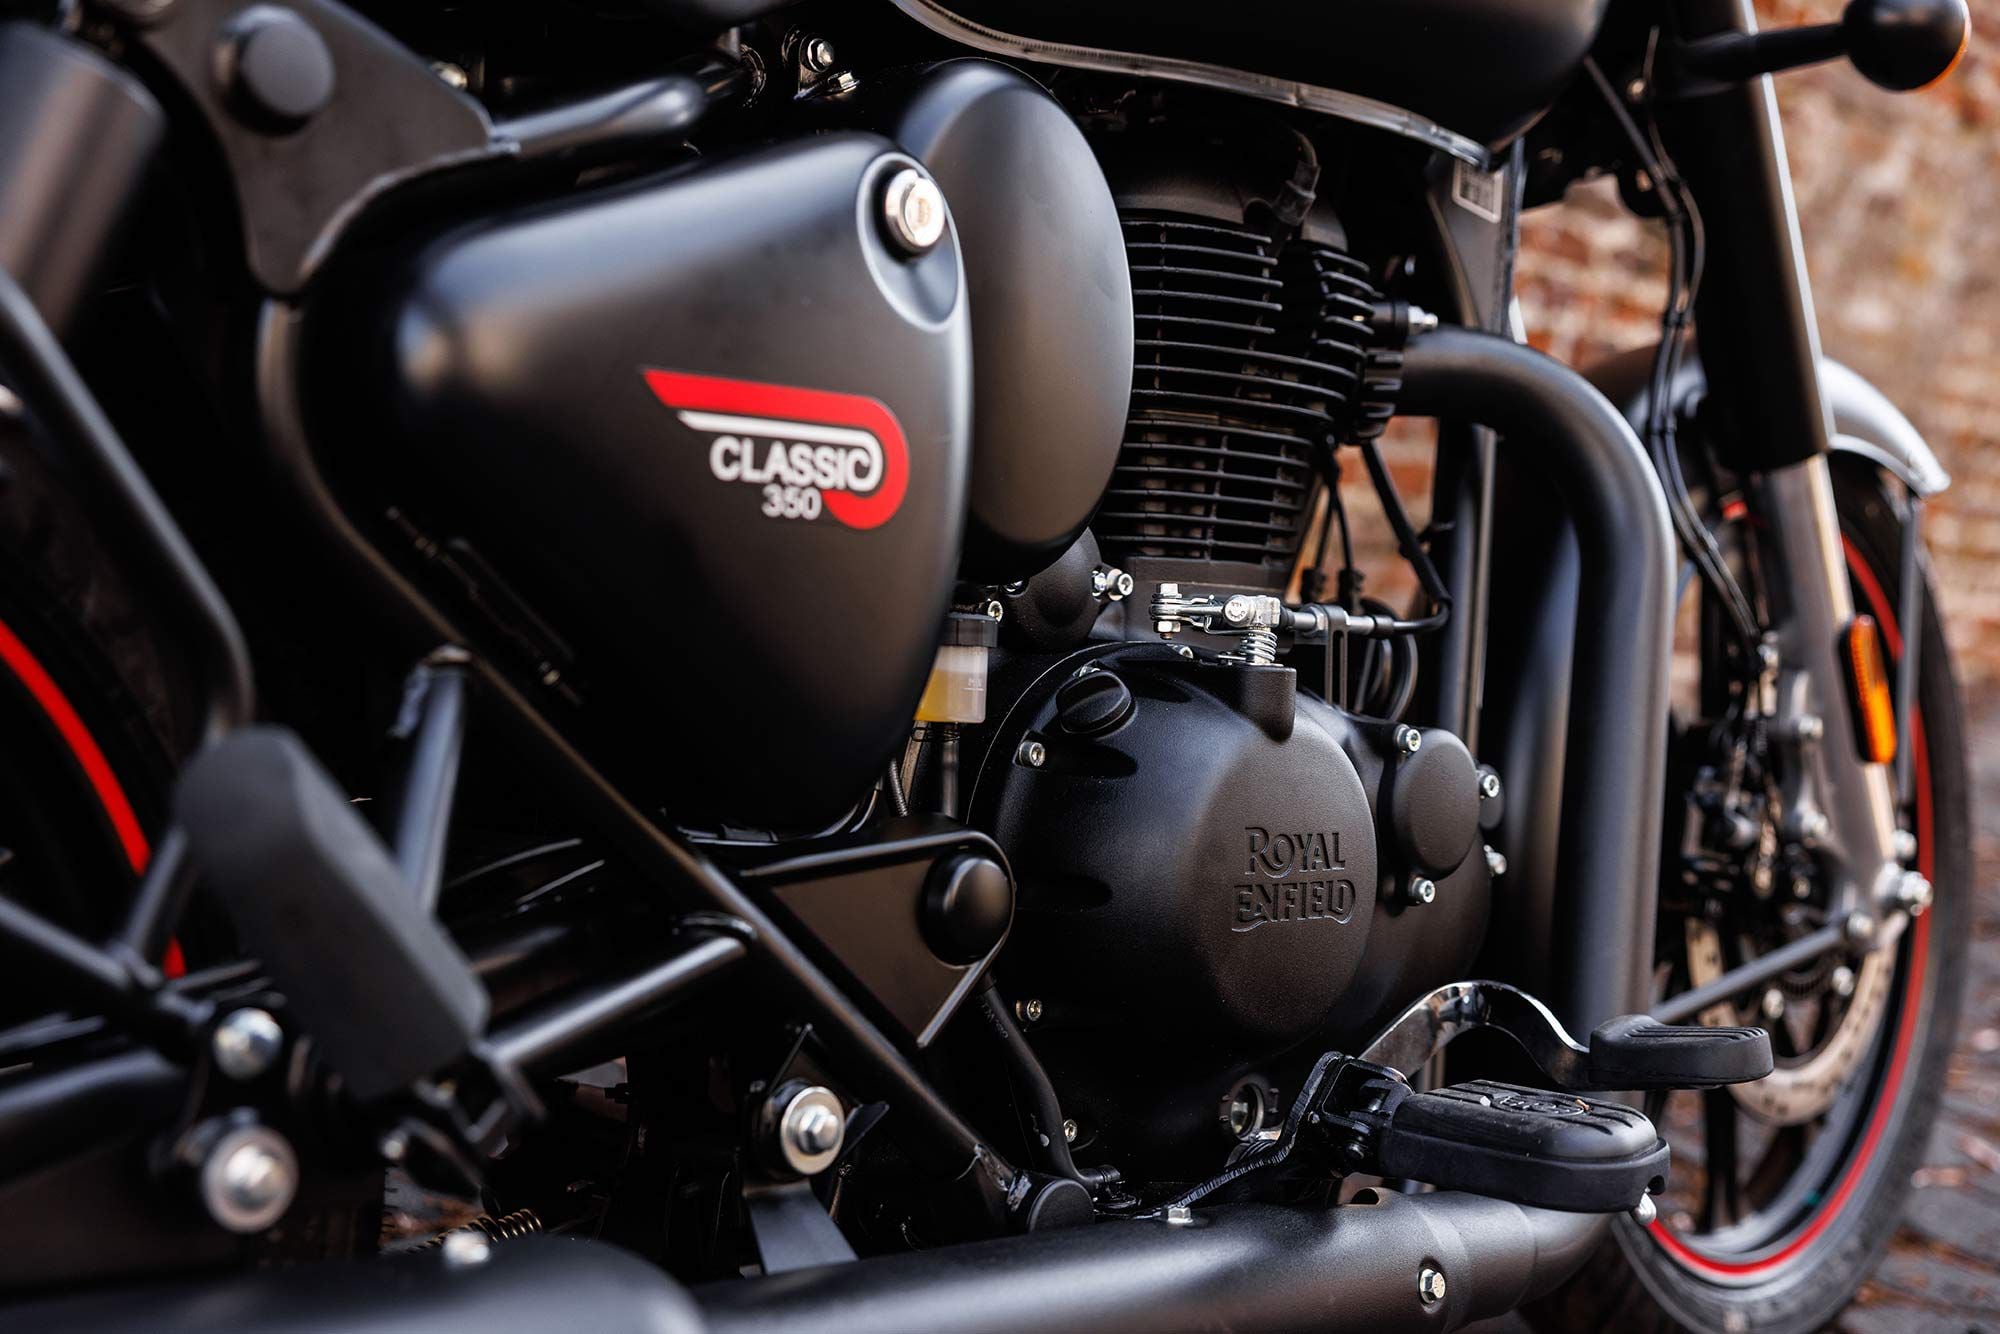 The Classic 350 is powered by the same air/oil-cooled 349cc DOHC powerplant as seen in the Royal Enfield Meteor 350, which we’ve become fond of for its gradual power delivery and gentle personality.